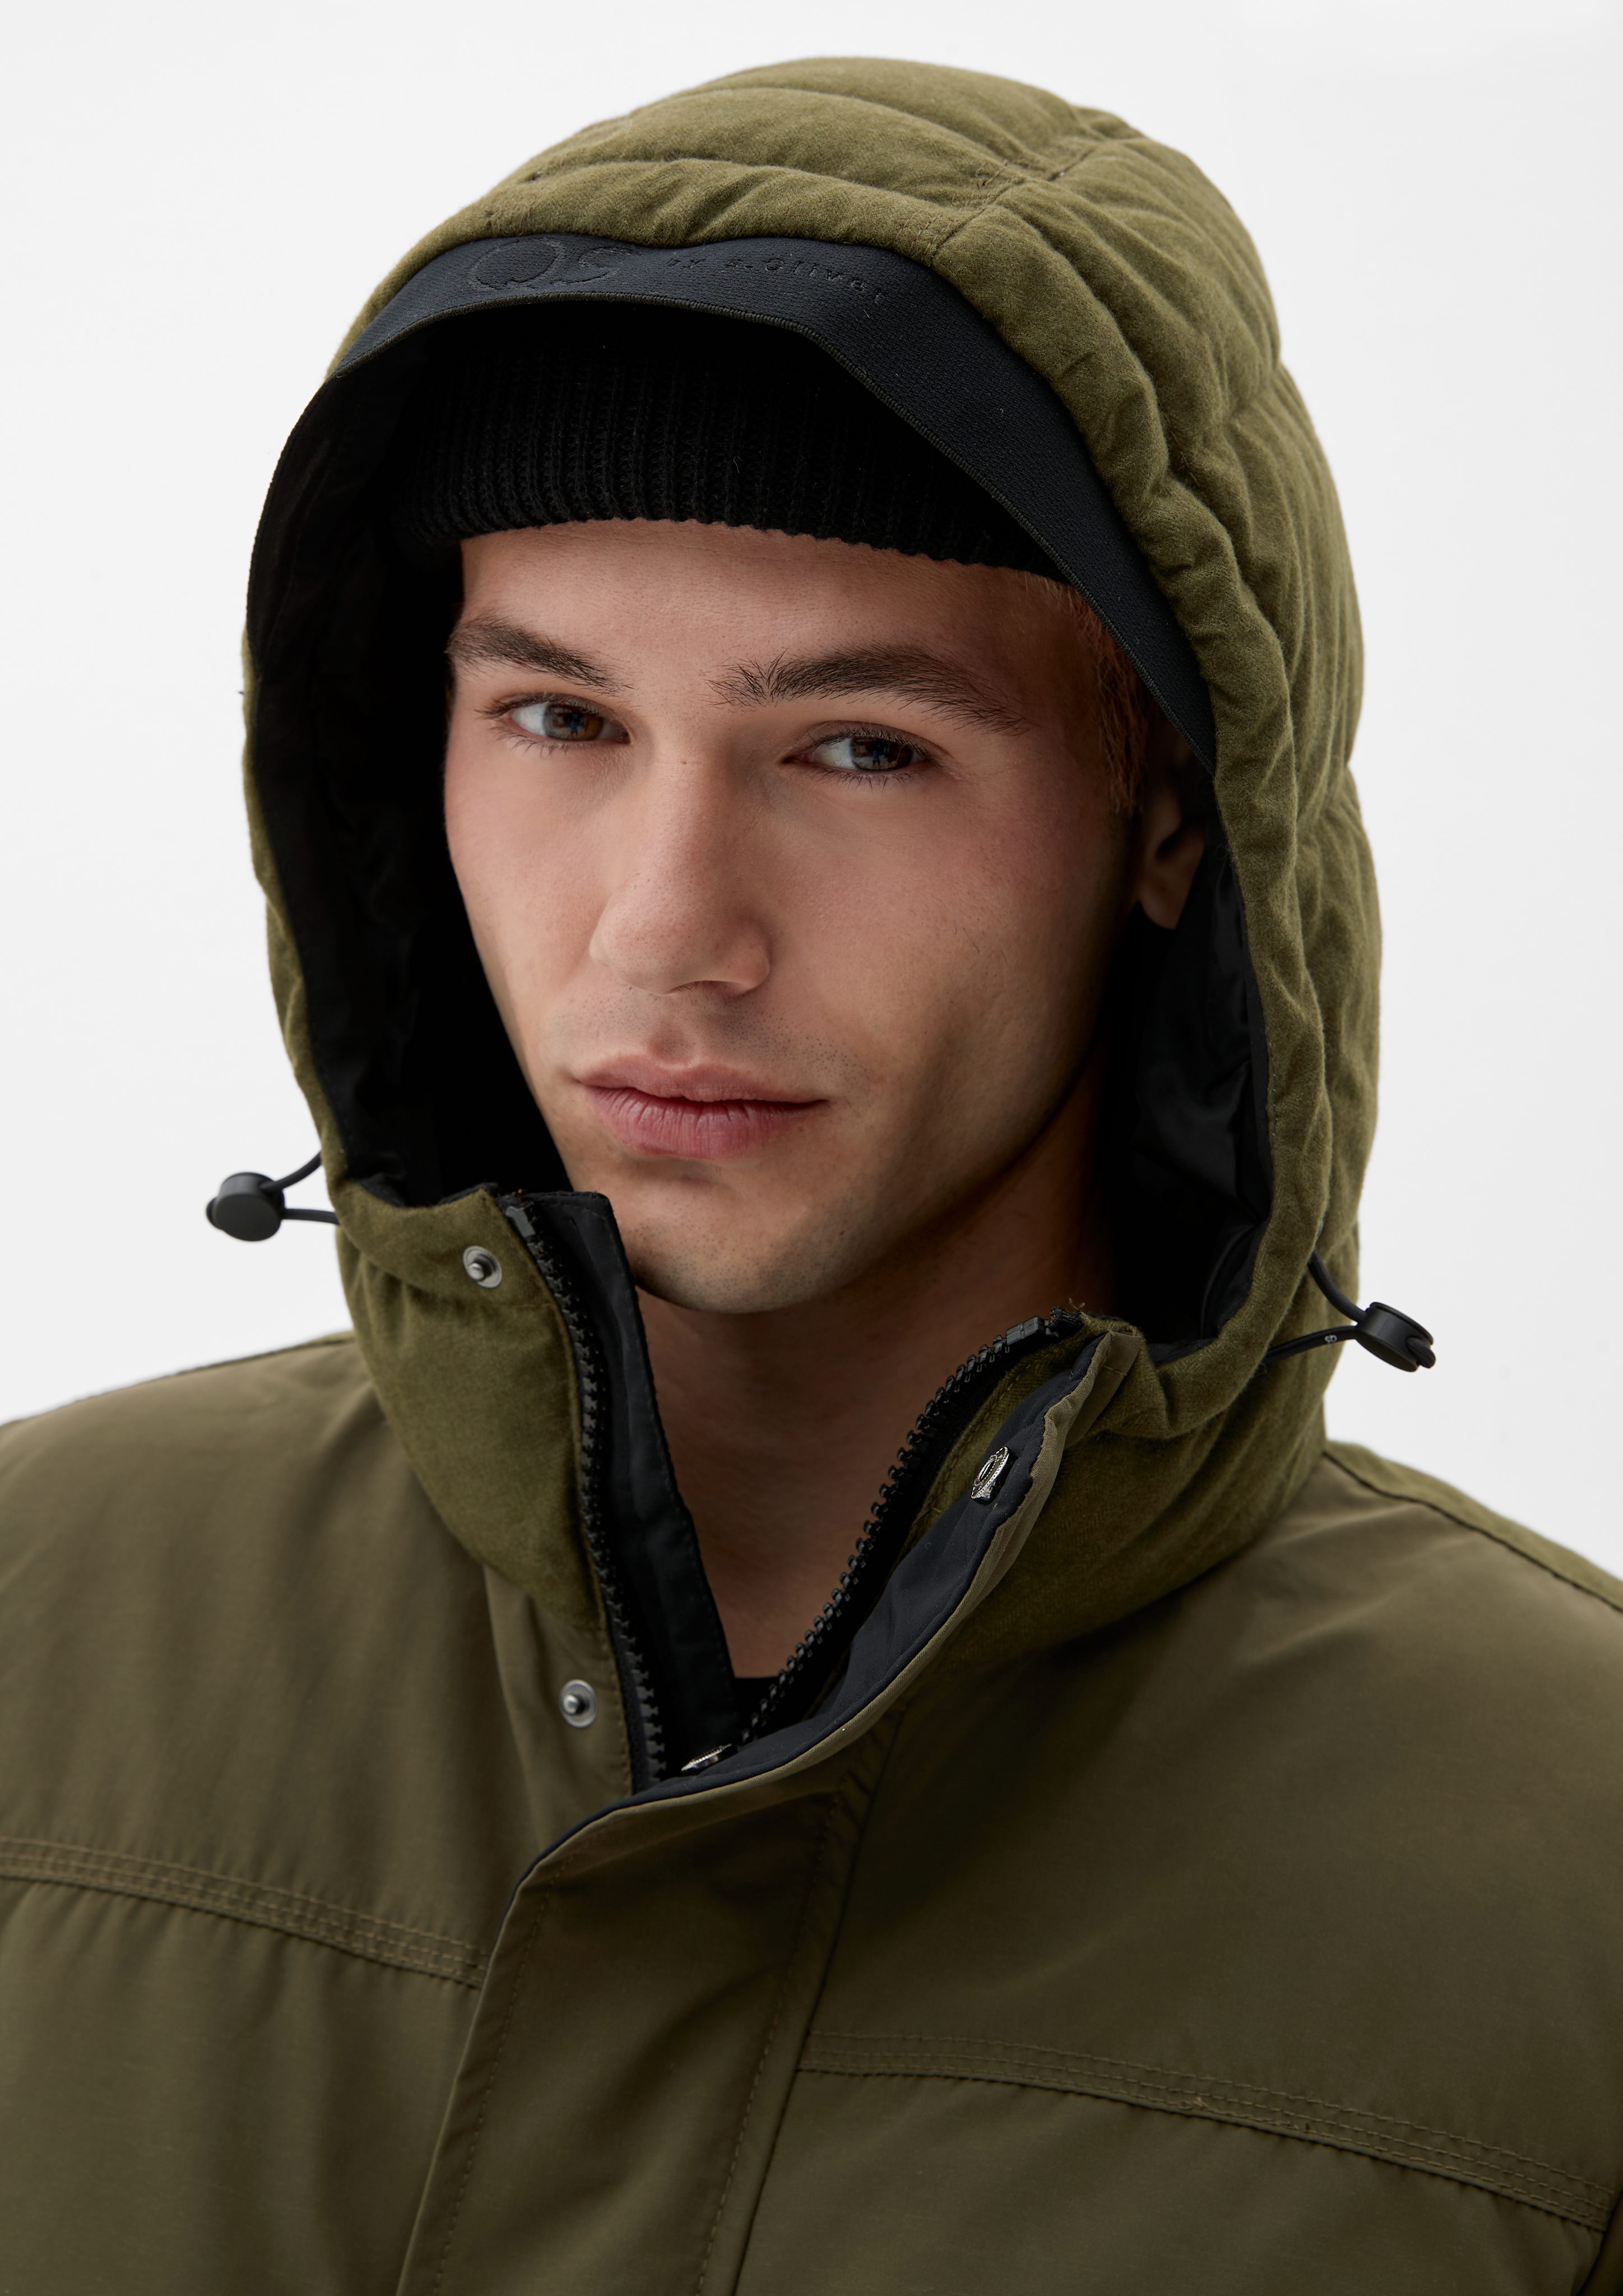 Allwetterjacke mit forest Label-Patch night QS Steppdetail Parka